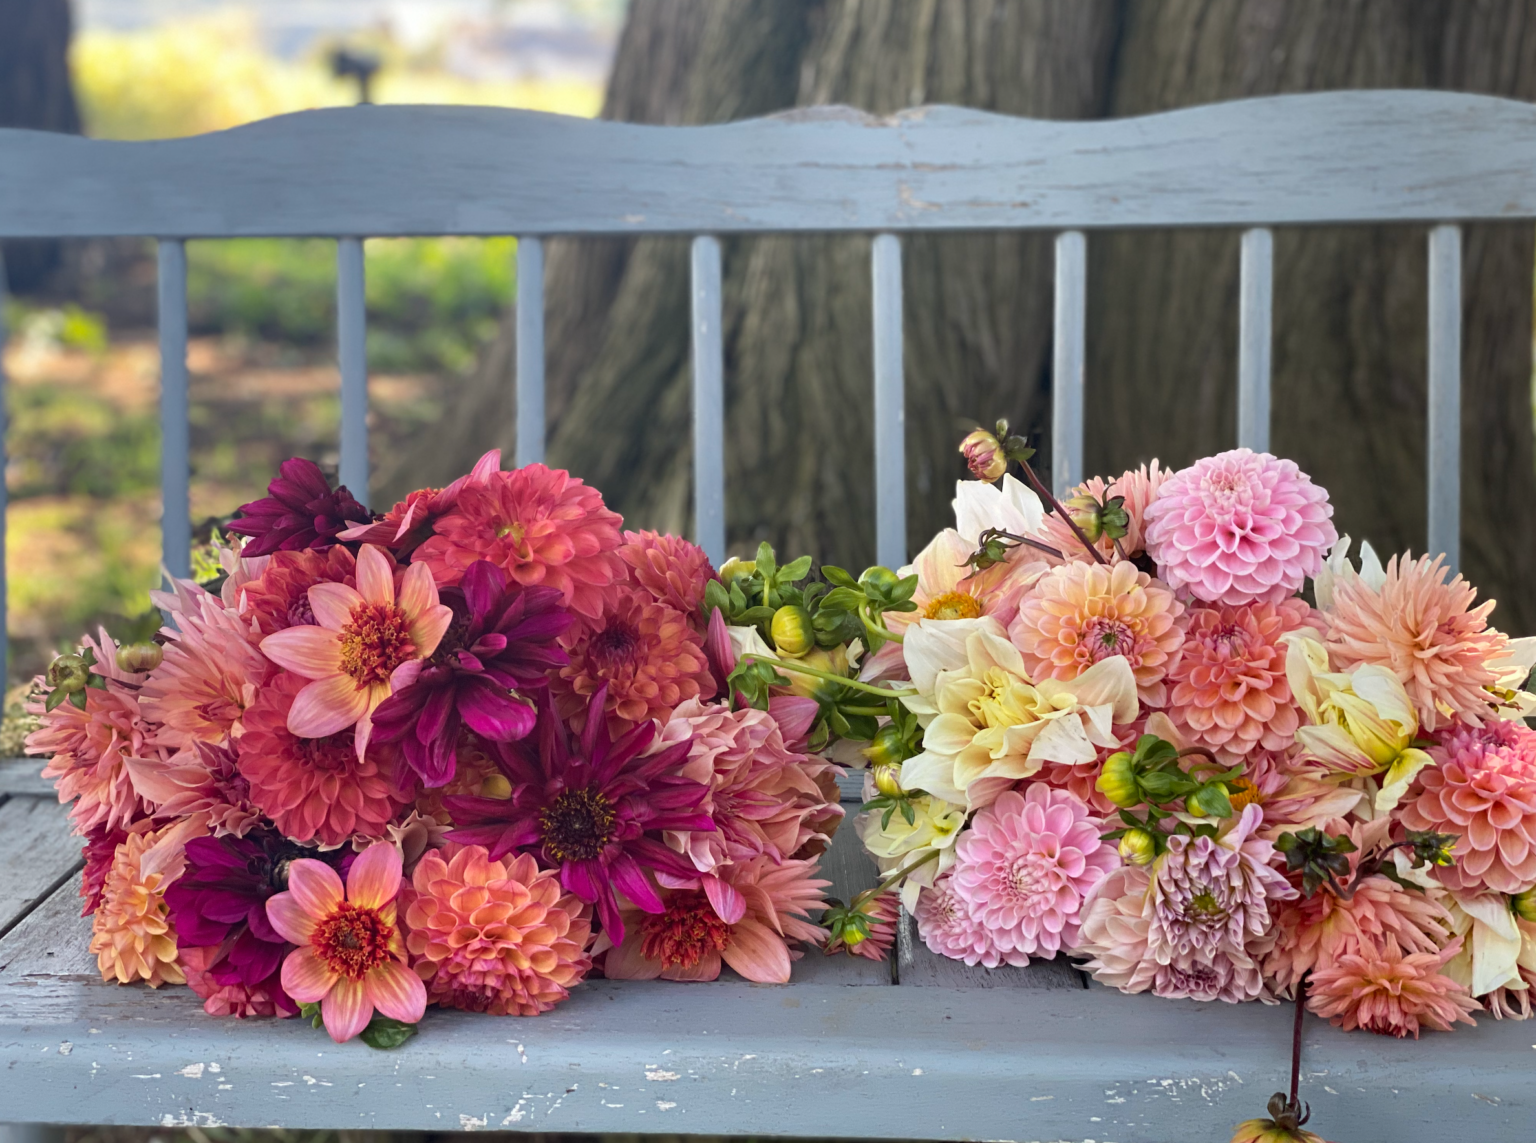 It's all about the blooms at Dahlia Day